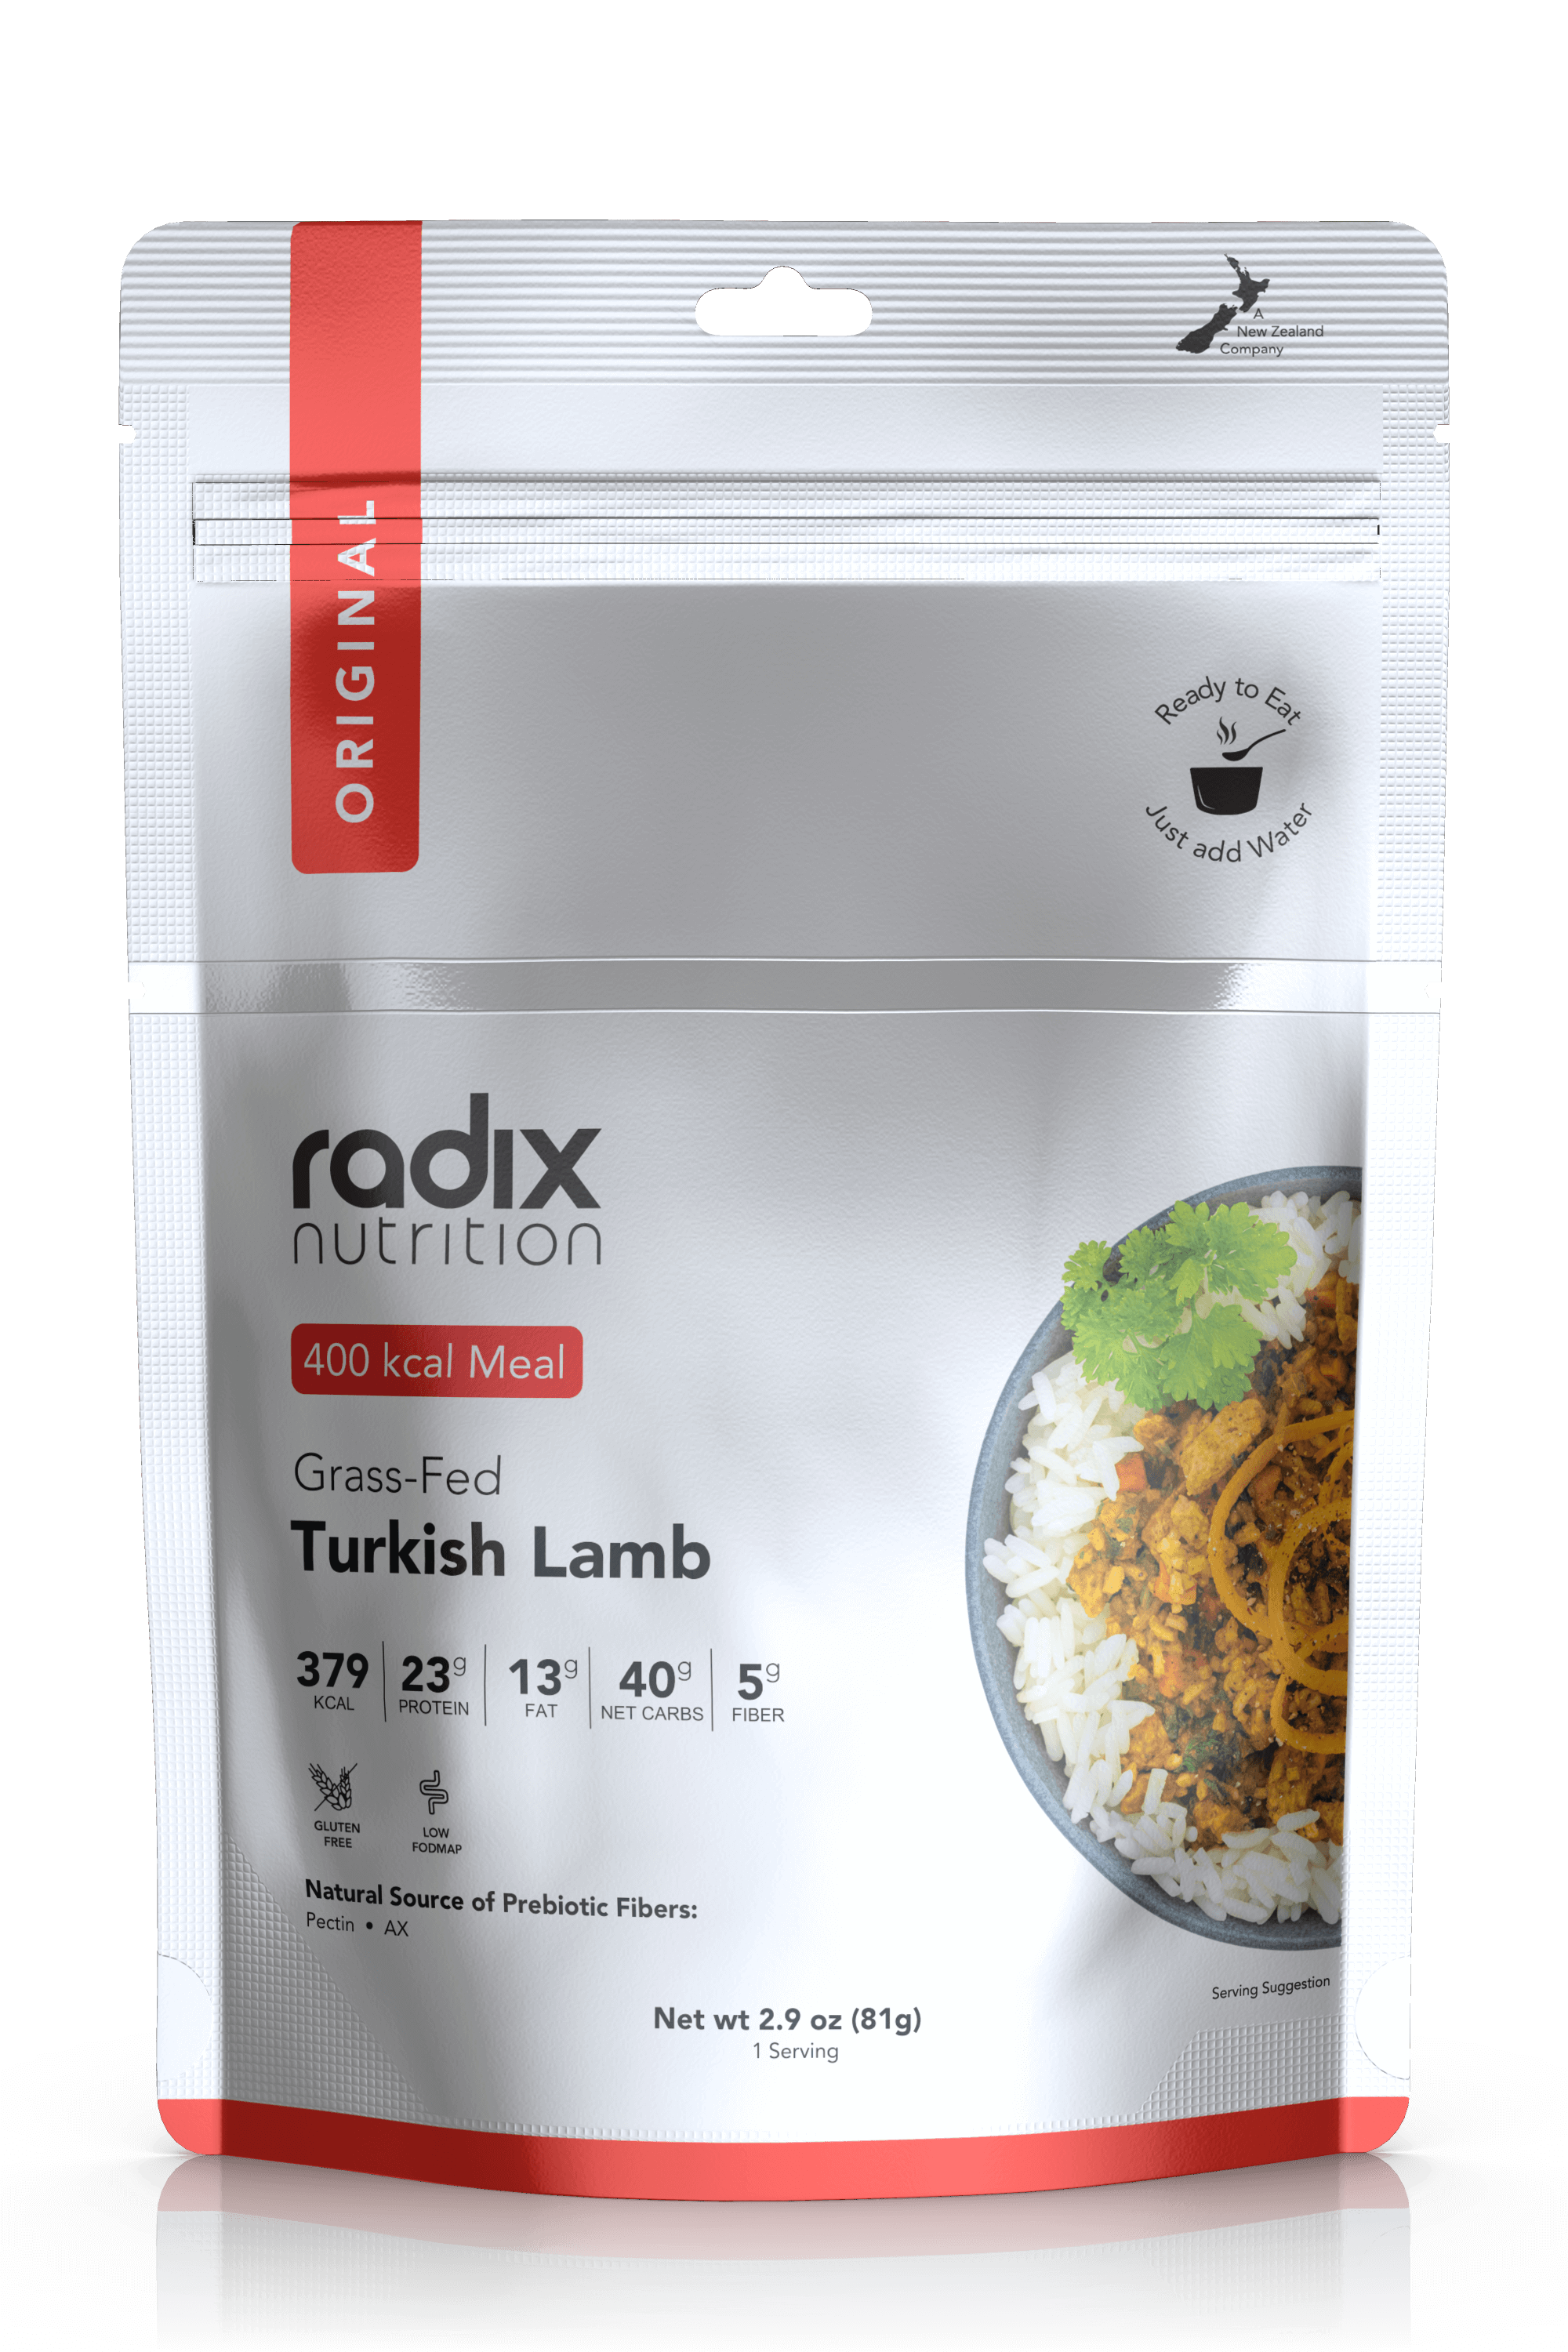 Radix Nutrition Original 400 Grass-Fed Turkish Lamb V7 - Tramping Food and Accessories sold by Venture Outdoors NZ